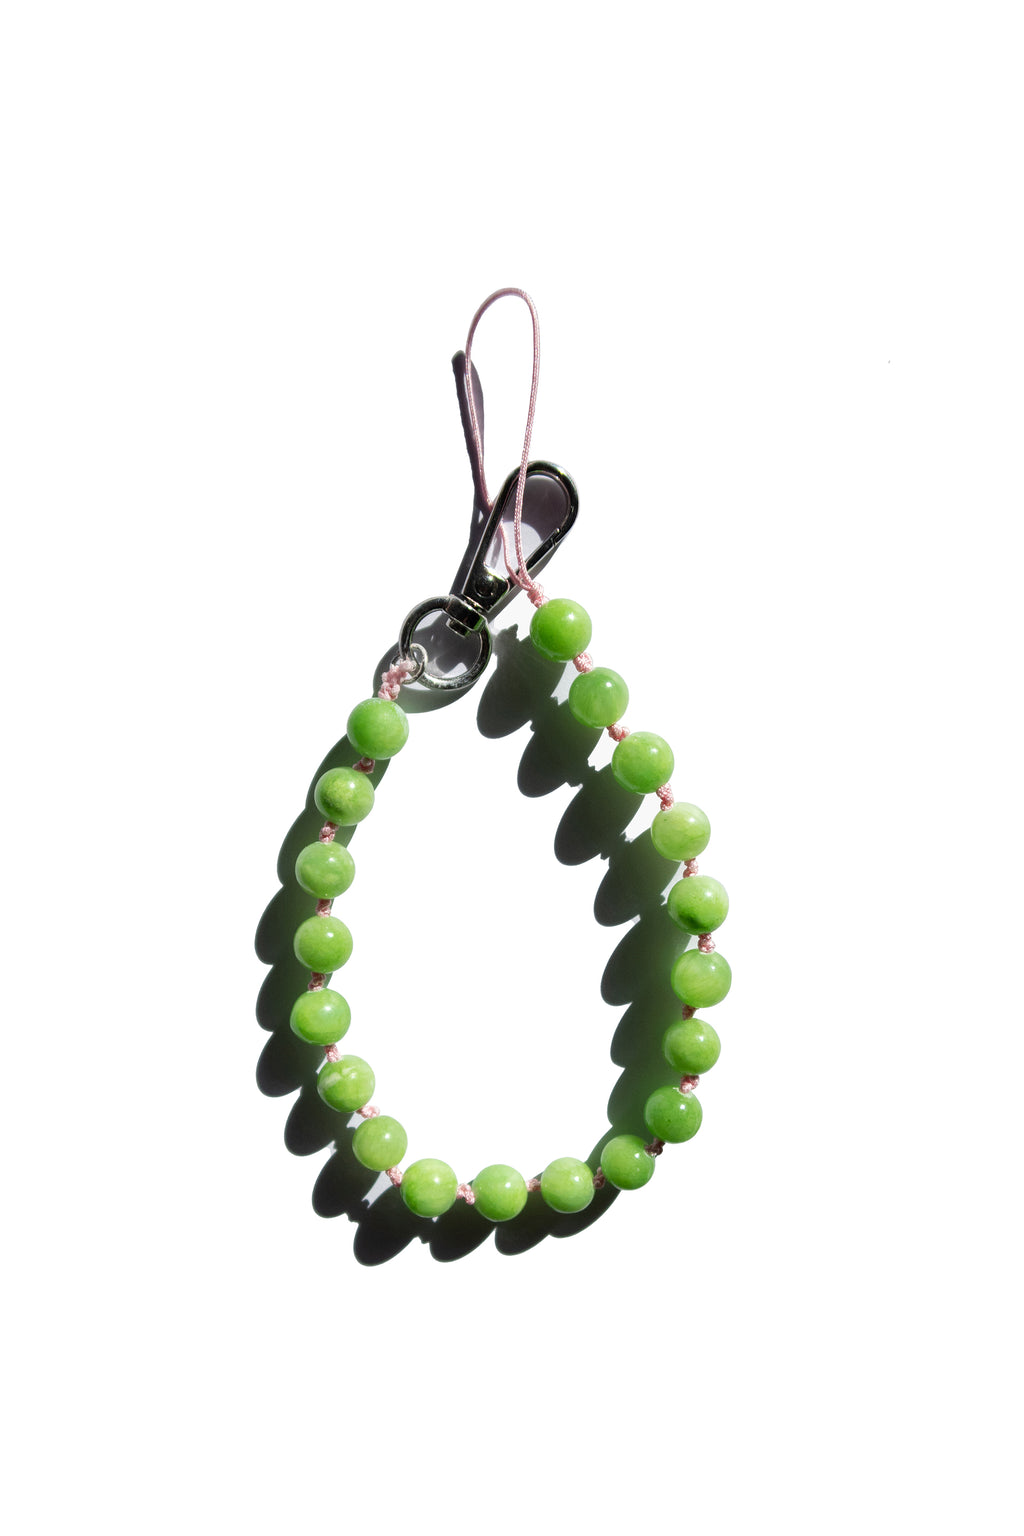 seree-beaded-phone-charm-in-green-quartzite-on-pink-cord-2